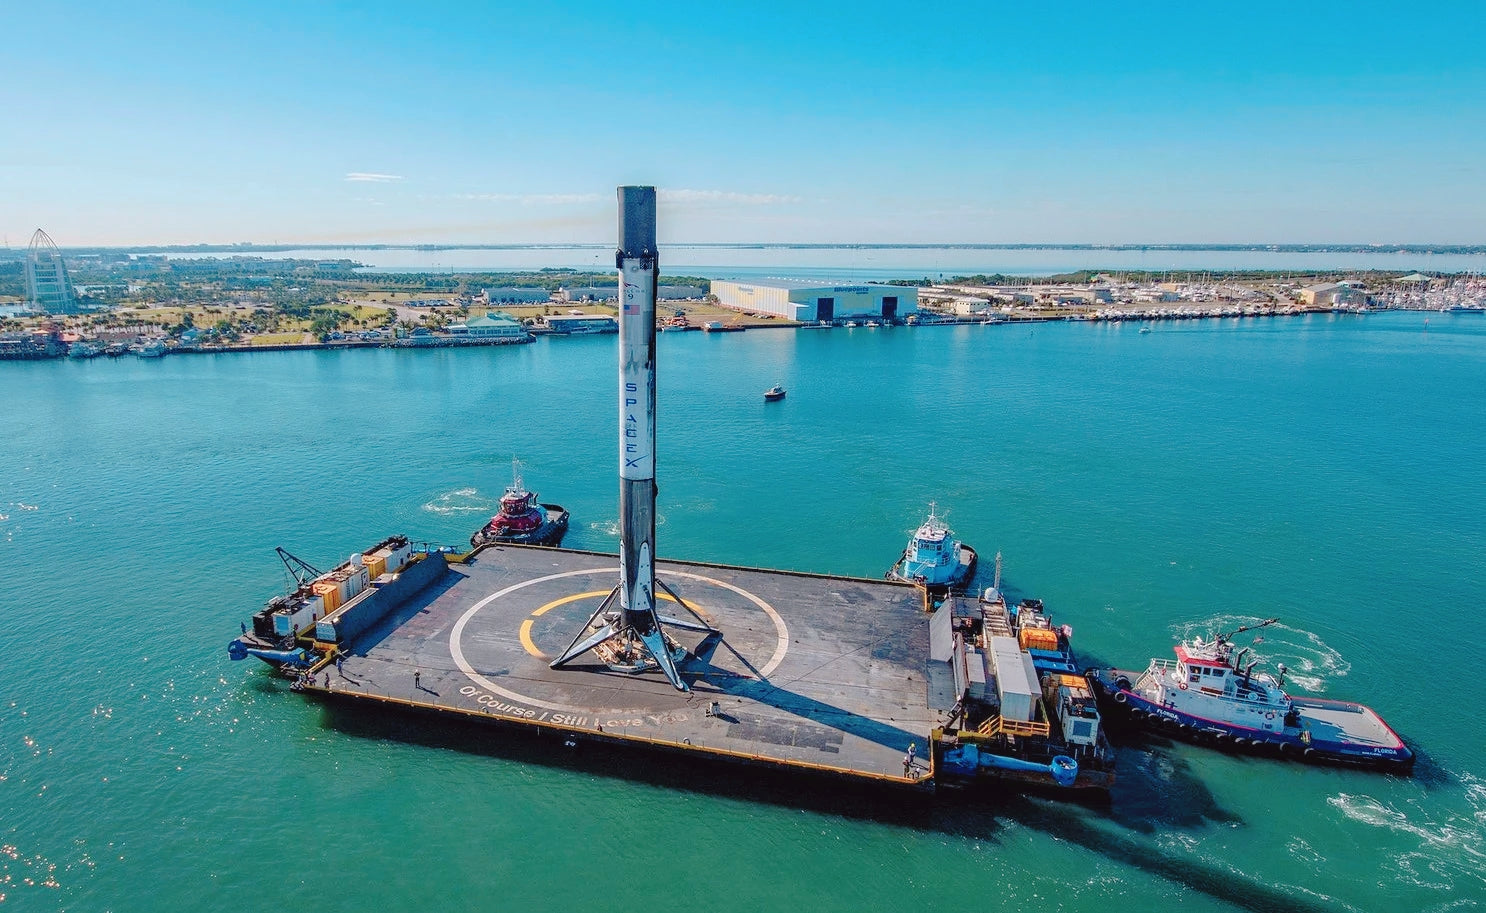 SpaceX's Falcon 9 Autonomous Drone Ship Is Already Connected To Starlink